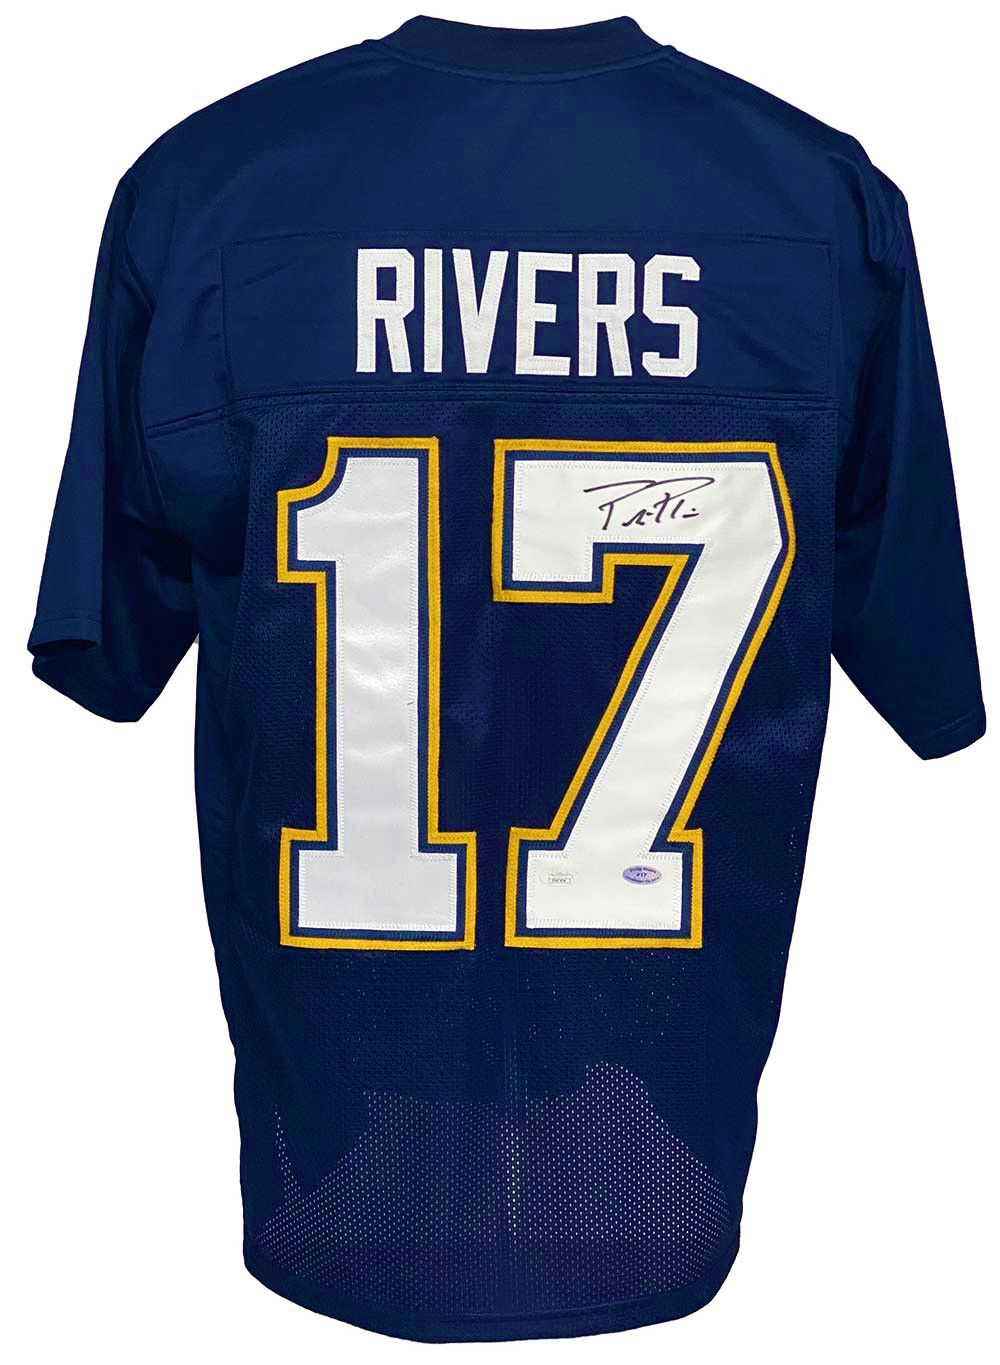 Los Angeles Chargers Philip Rivers Autographed Pro Style Navy Blue Jersey  JSA Authenticated - Tennzone Sports Memorabilia